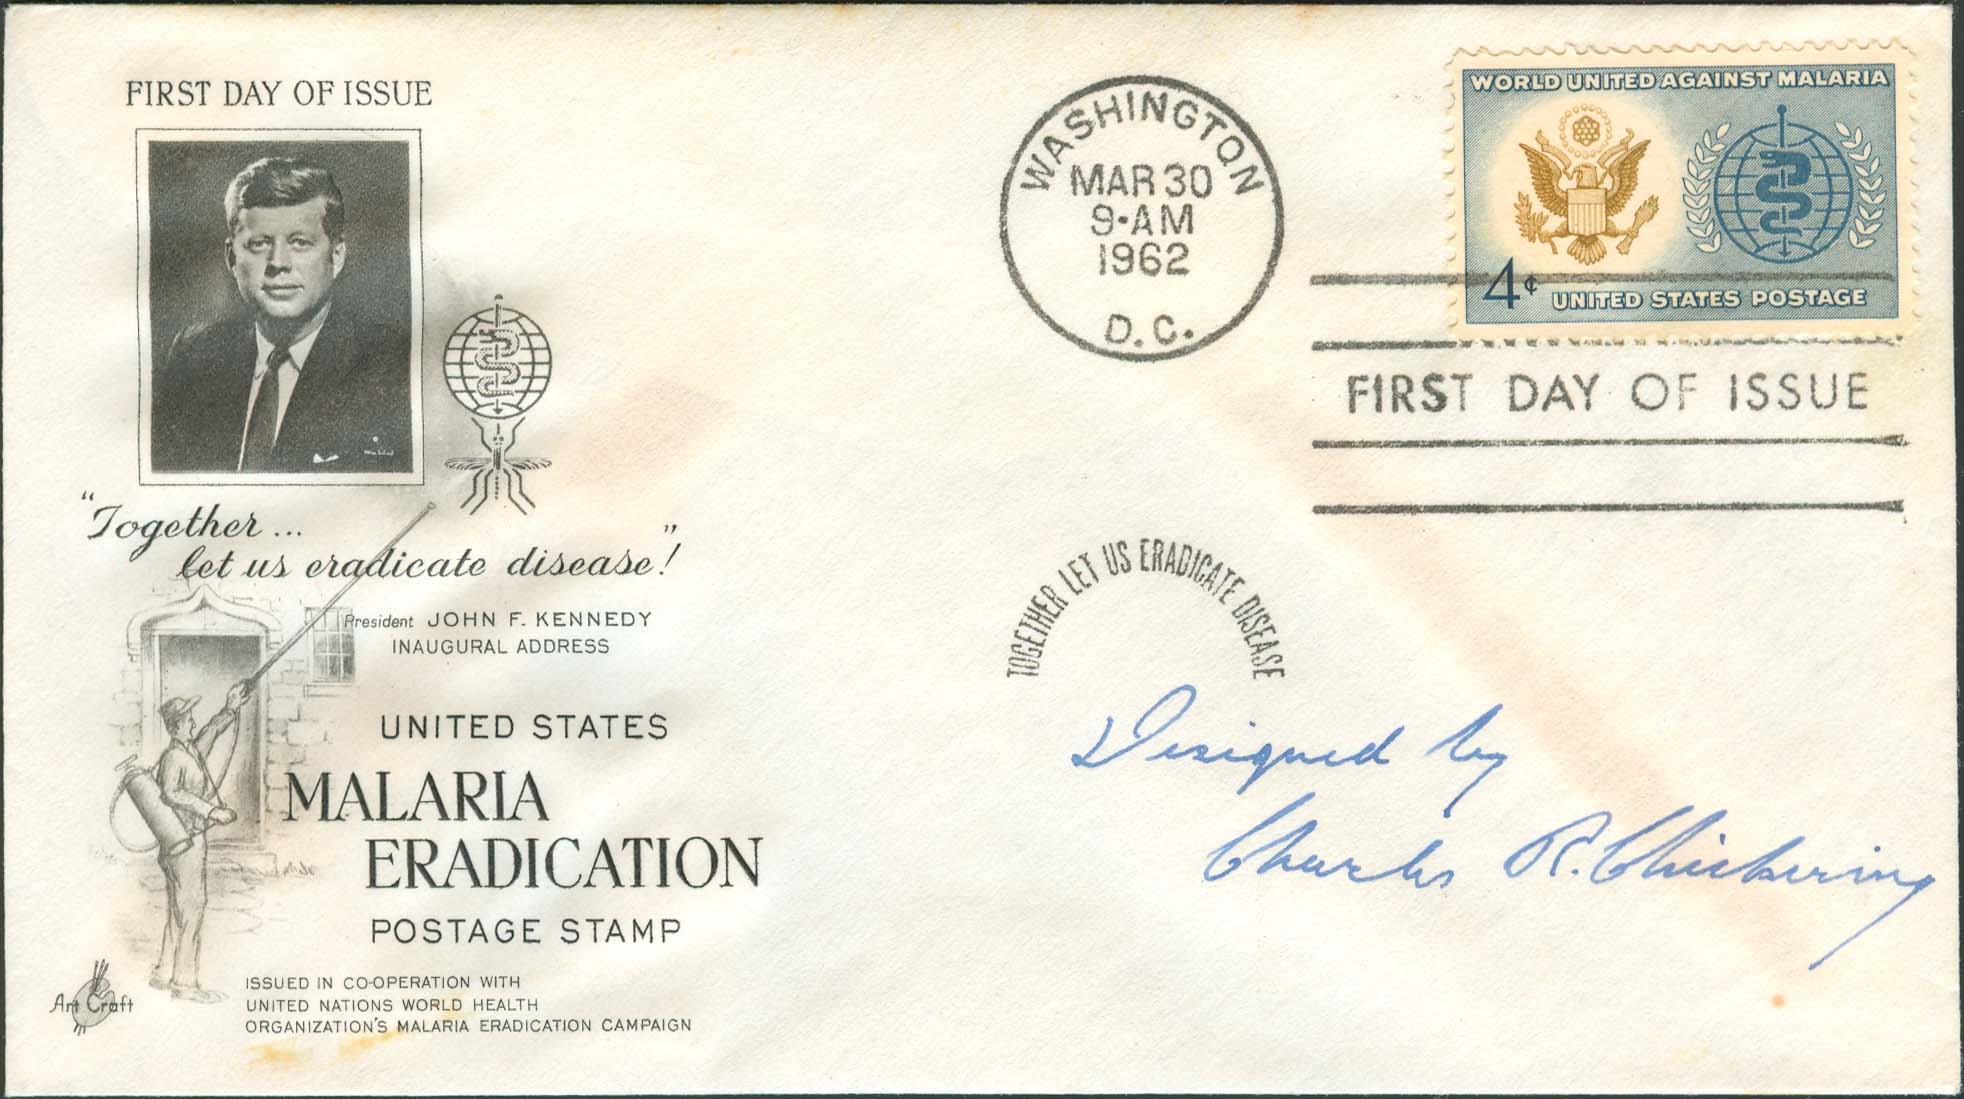 Art Craft Kennedy FDC signed "Designed by Charles R. Chickering"